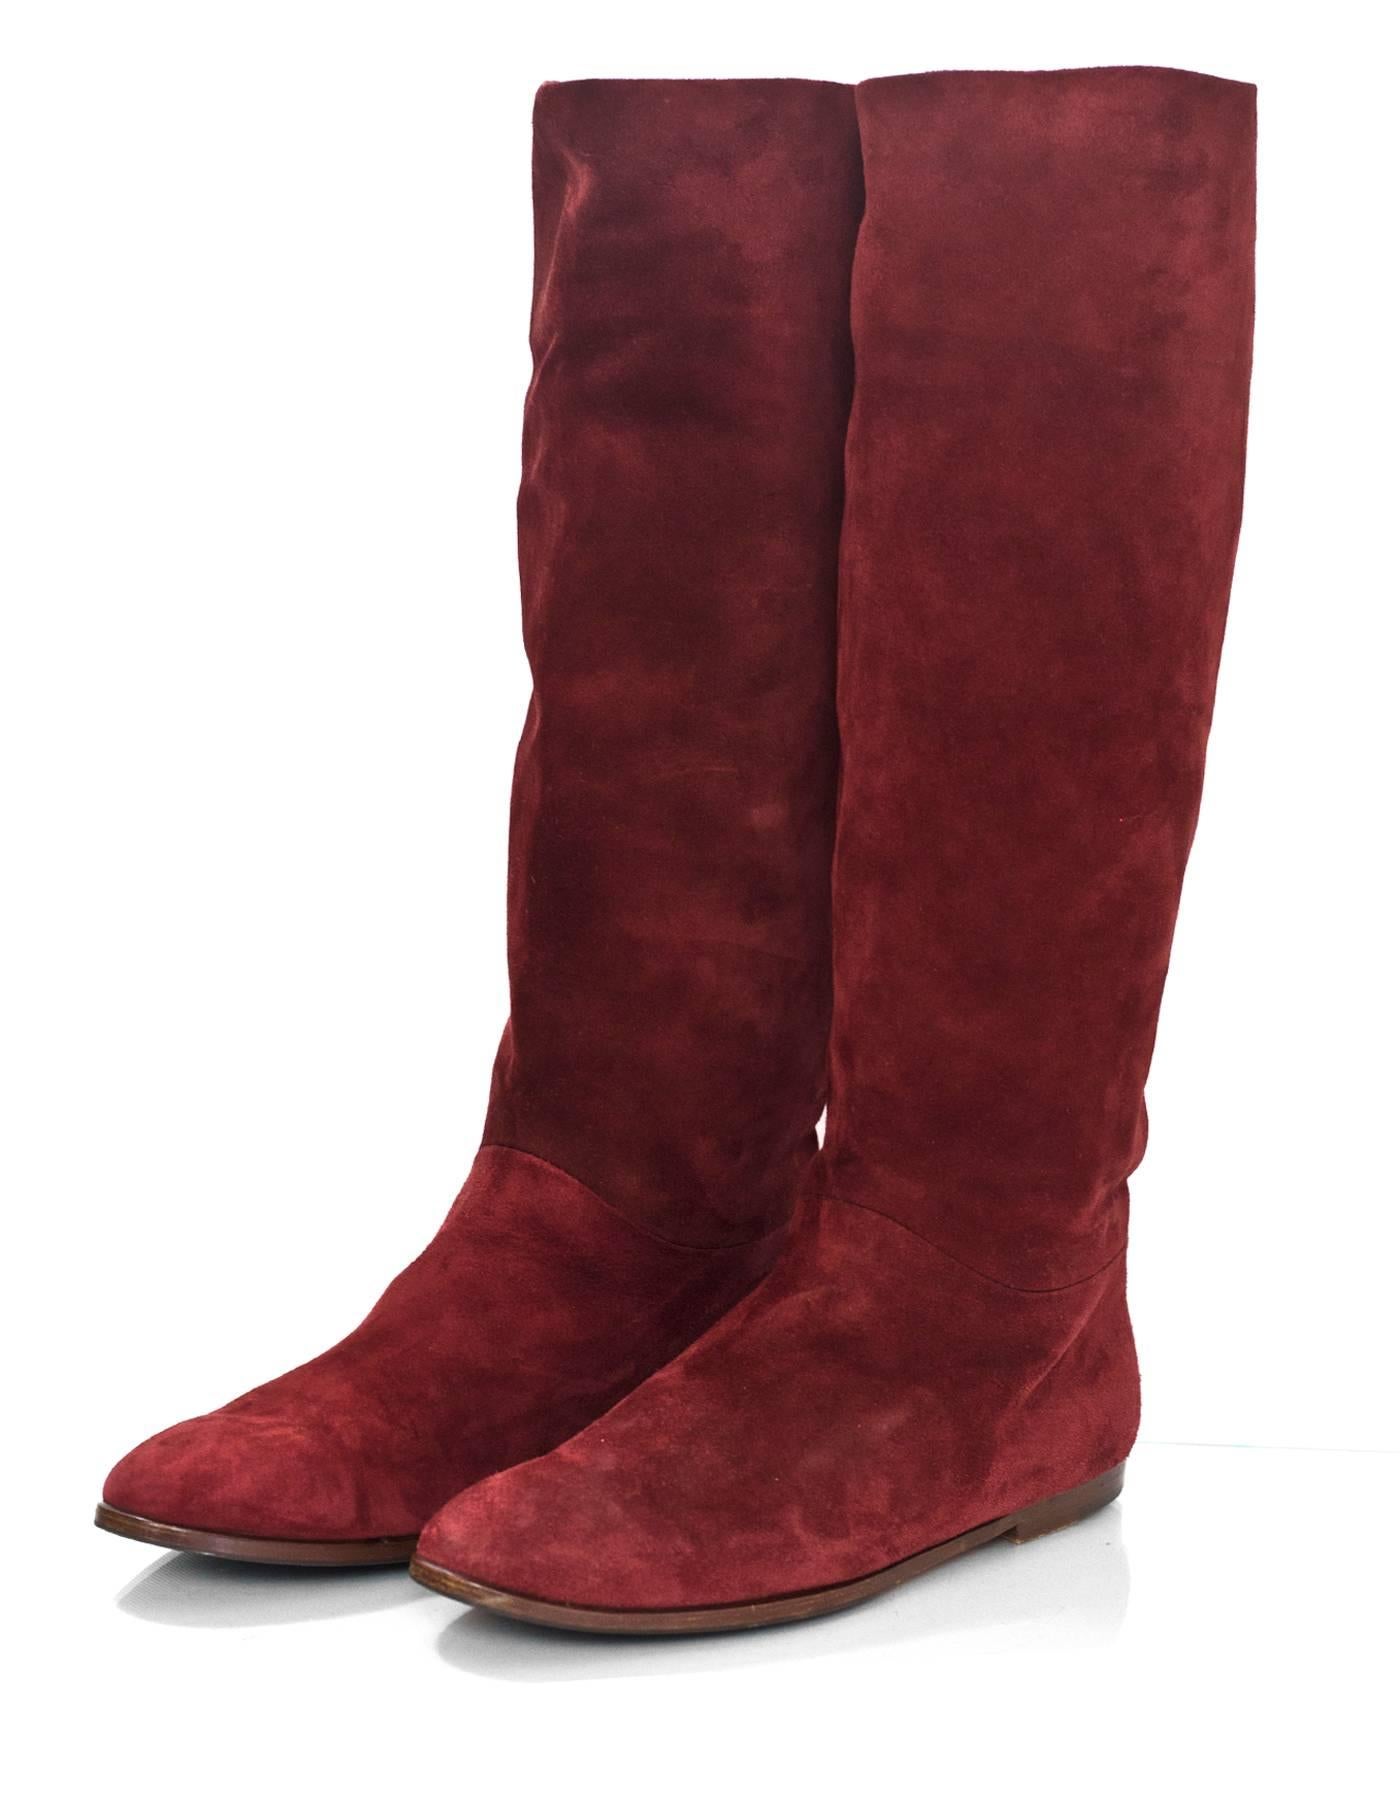 Gucci Burgundy Suede Boots Sz 40

Made In: Italy
Color: Burgundy
Materials: Suede
Closure/Opening: Pull on
Sole Stamp: Gucci Made in Italy 40B
Overall Condition: Excellent pre-owned condition with the exception of being re-soled, light soiling at